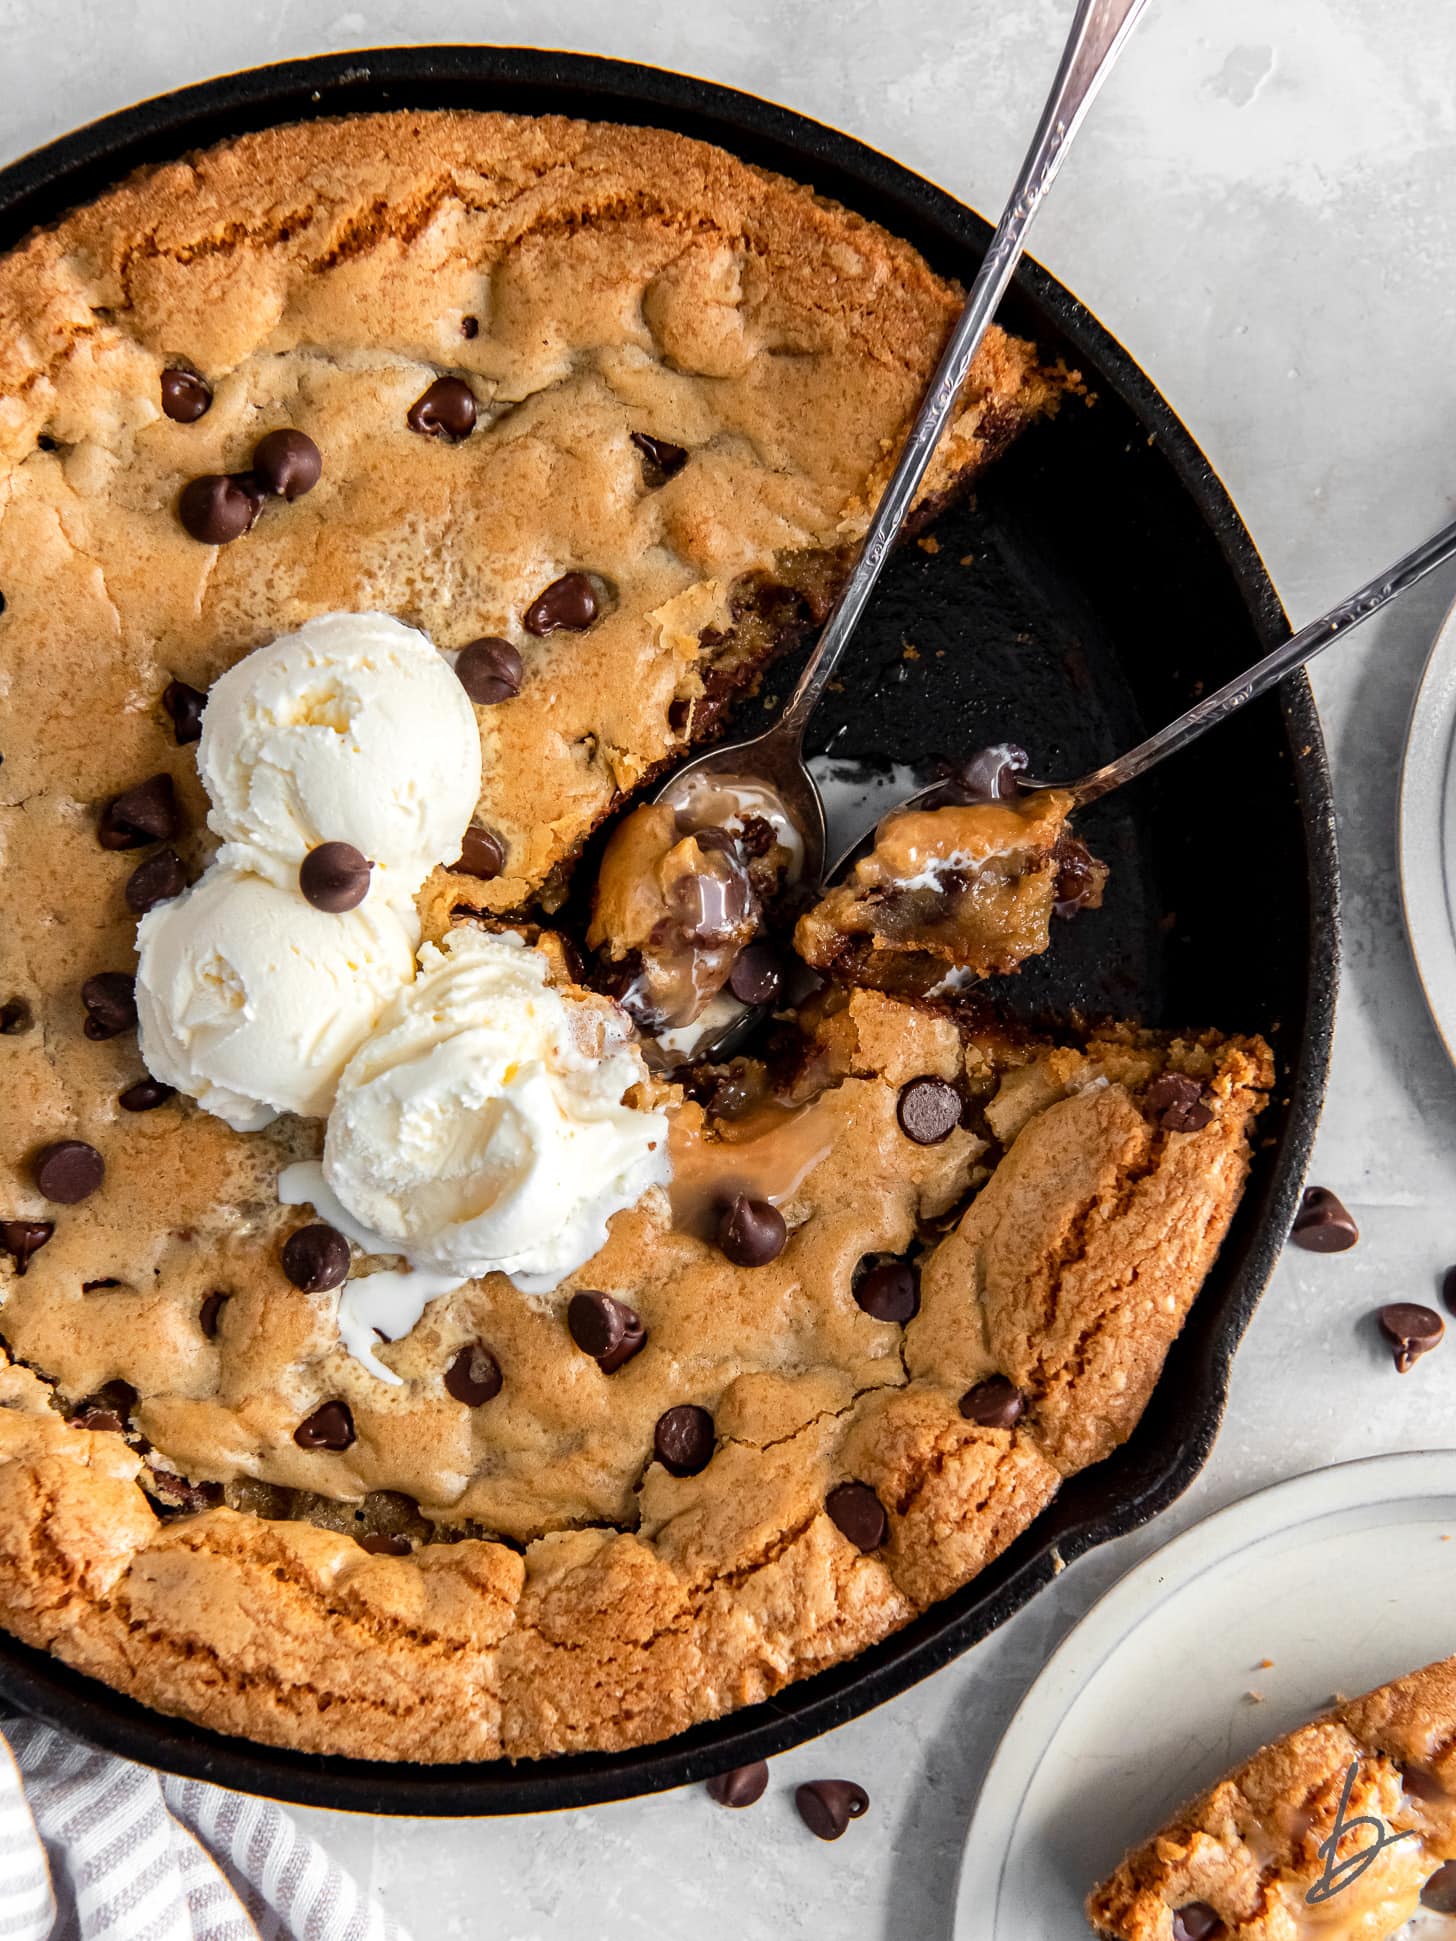 two spoons holding bites in the center of a gooey chocolate chip skillet cookie with vanilla ice cream.